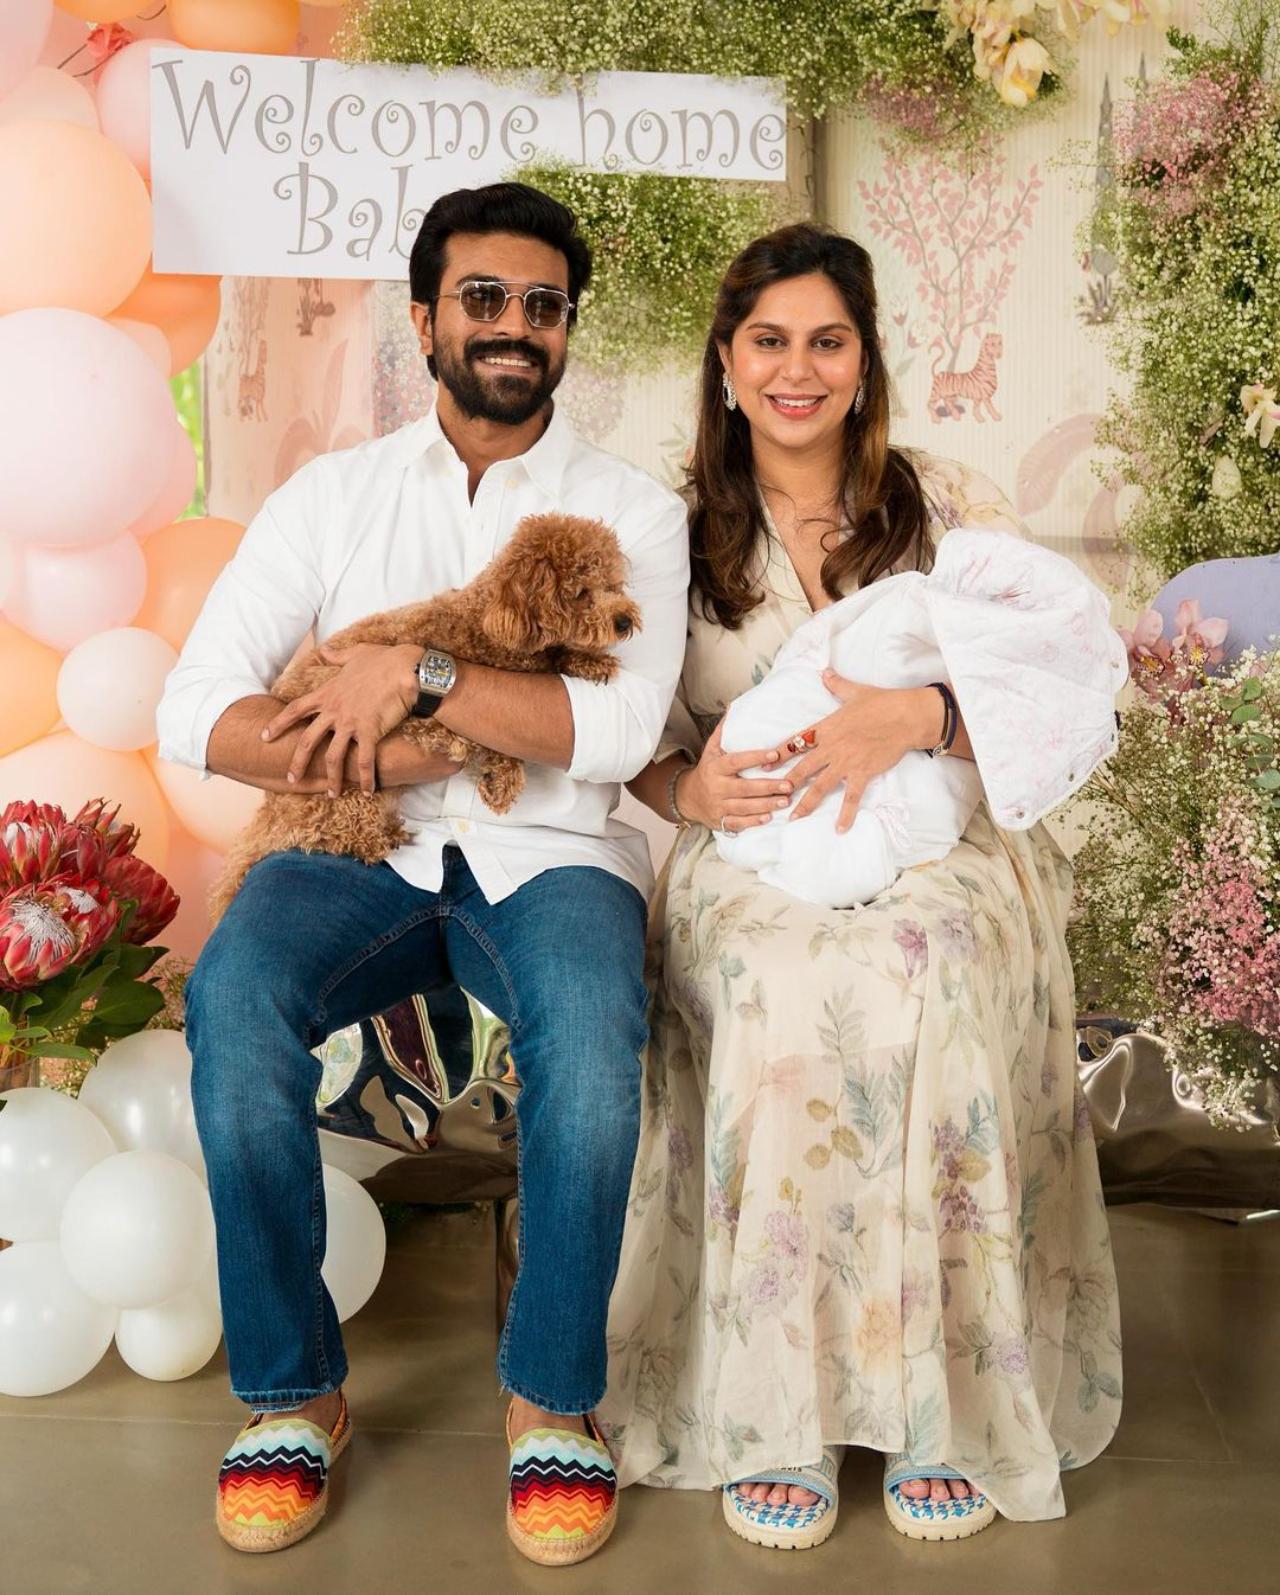 Ram Charan and Upasana welcomed their first child, a baby girl on June 20th at Apollo Hospital Jubilee Hills Hyderabad. The couple received a special gift - a tune by the Oscar Winning singer and their close friend Kaala Bhairava, who sang 'Naatu Naatu'